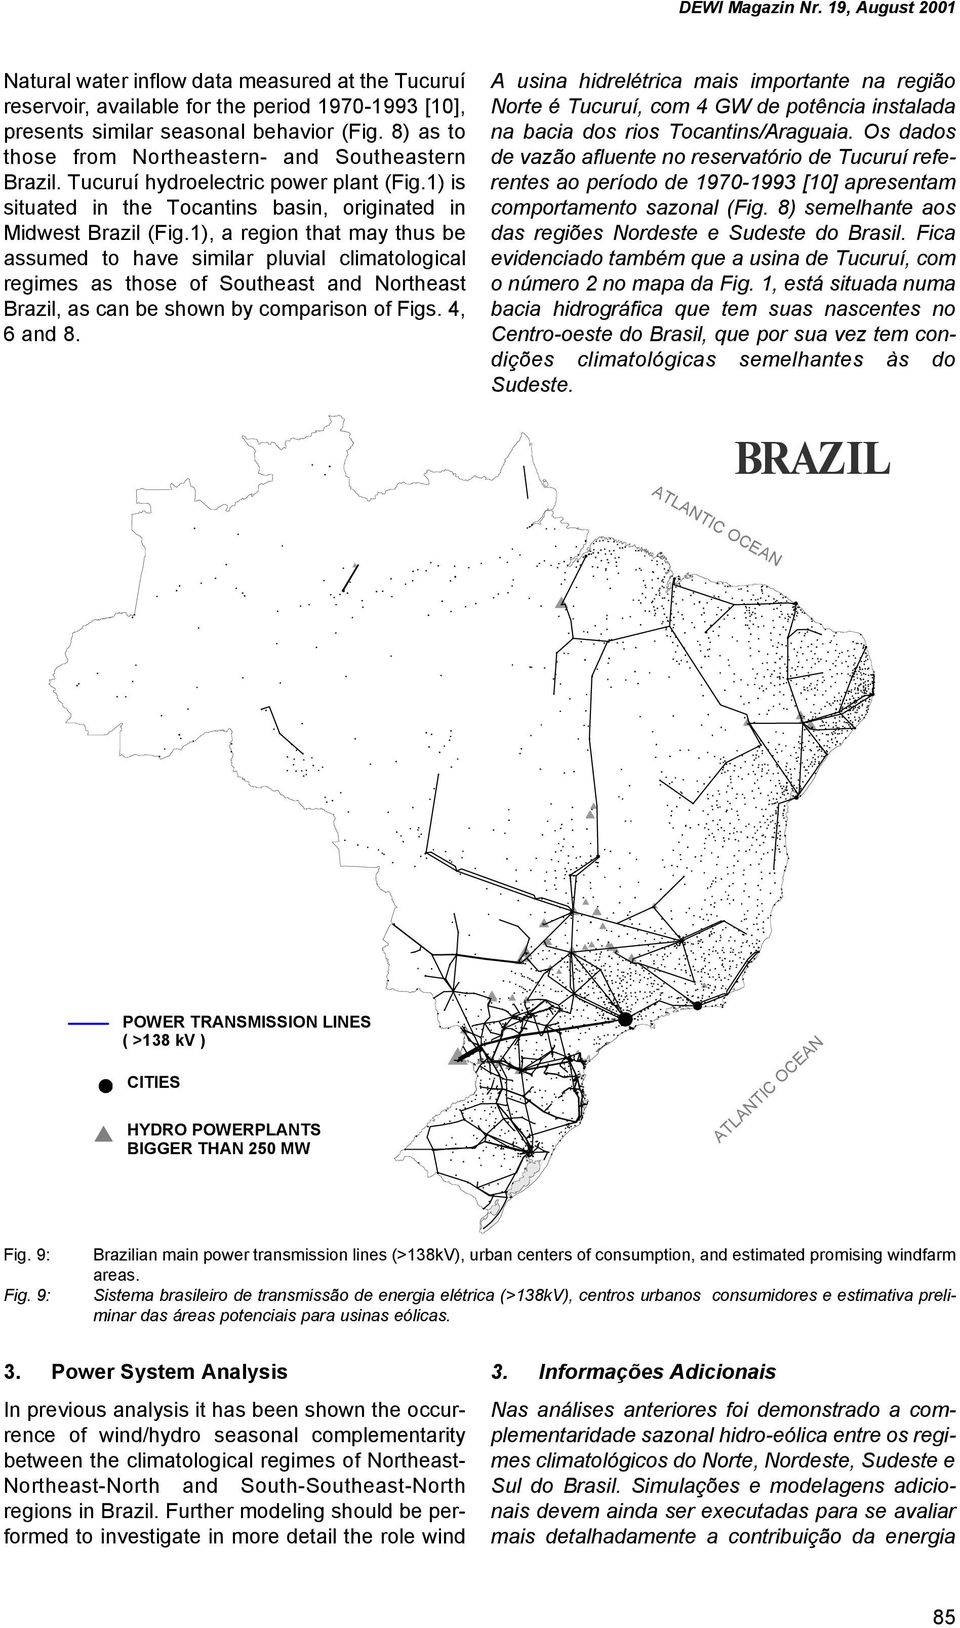 1), a region that may thus be assumed to have similar pluvial climatological regimes as those of Southeast and Northeast Brazil, as can be shown by comparison of Figs. 4, 6 and 8.